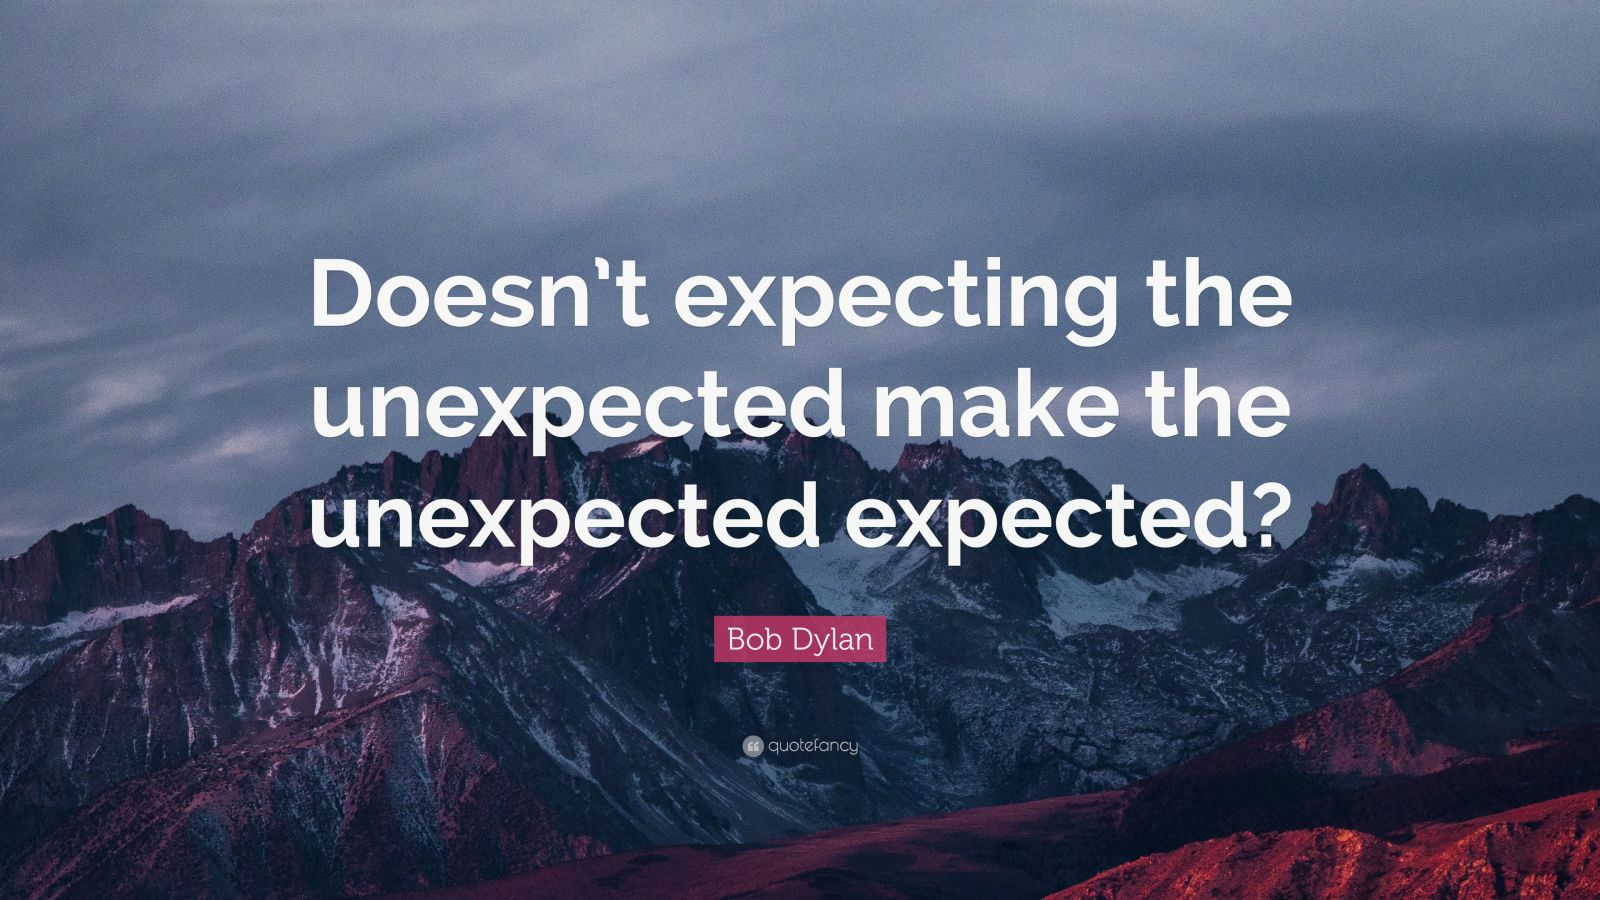 Bob Dylan Quote “doesnt Expecting The Unexpected Make The Unexpected